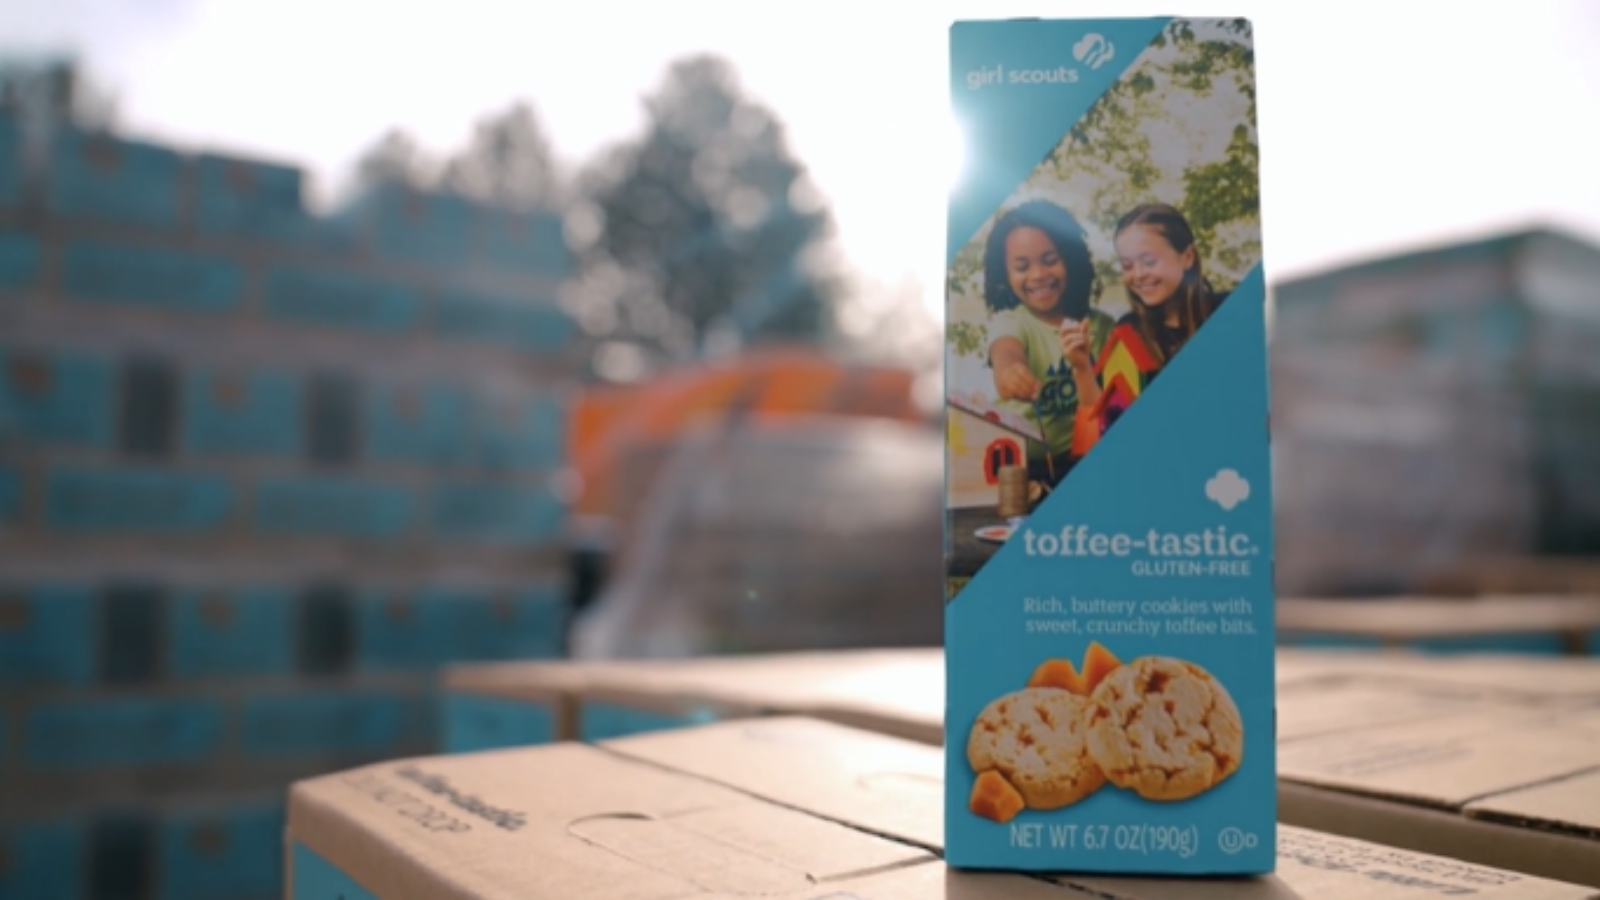 Image of a box of Toffee-Tastic Girl Scout cookies resting on a bench on a sunny day.